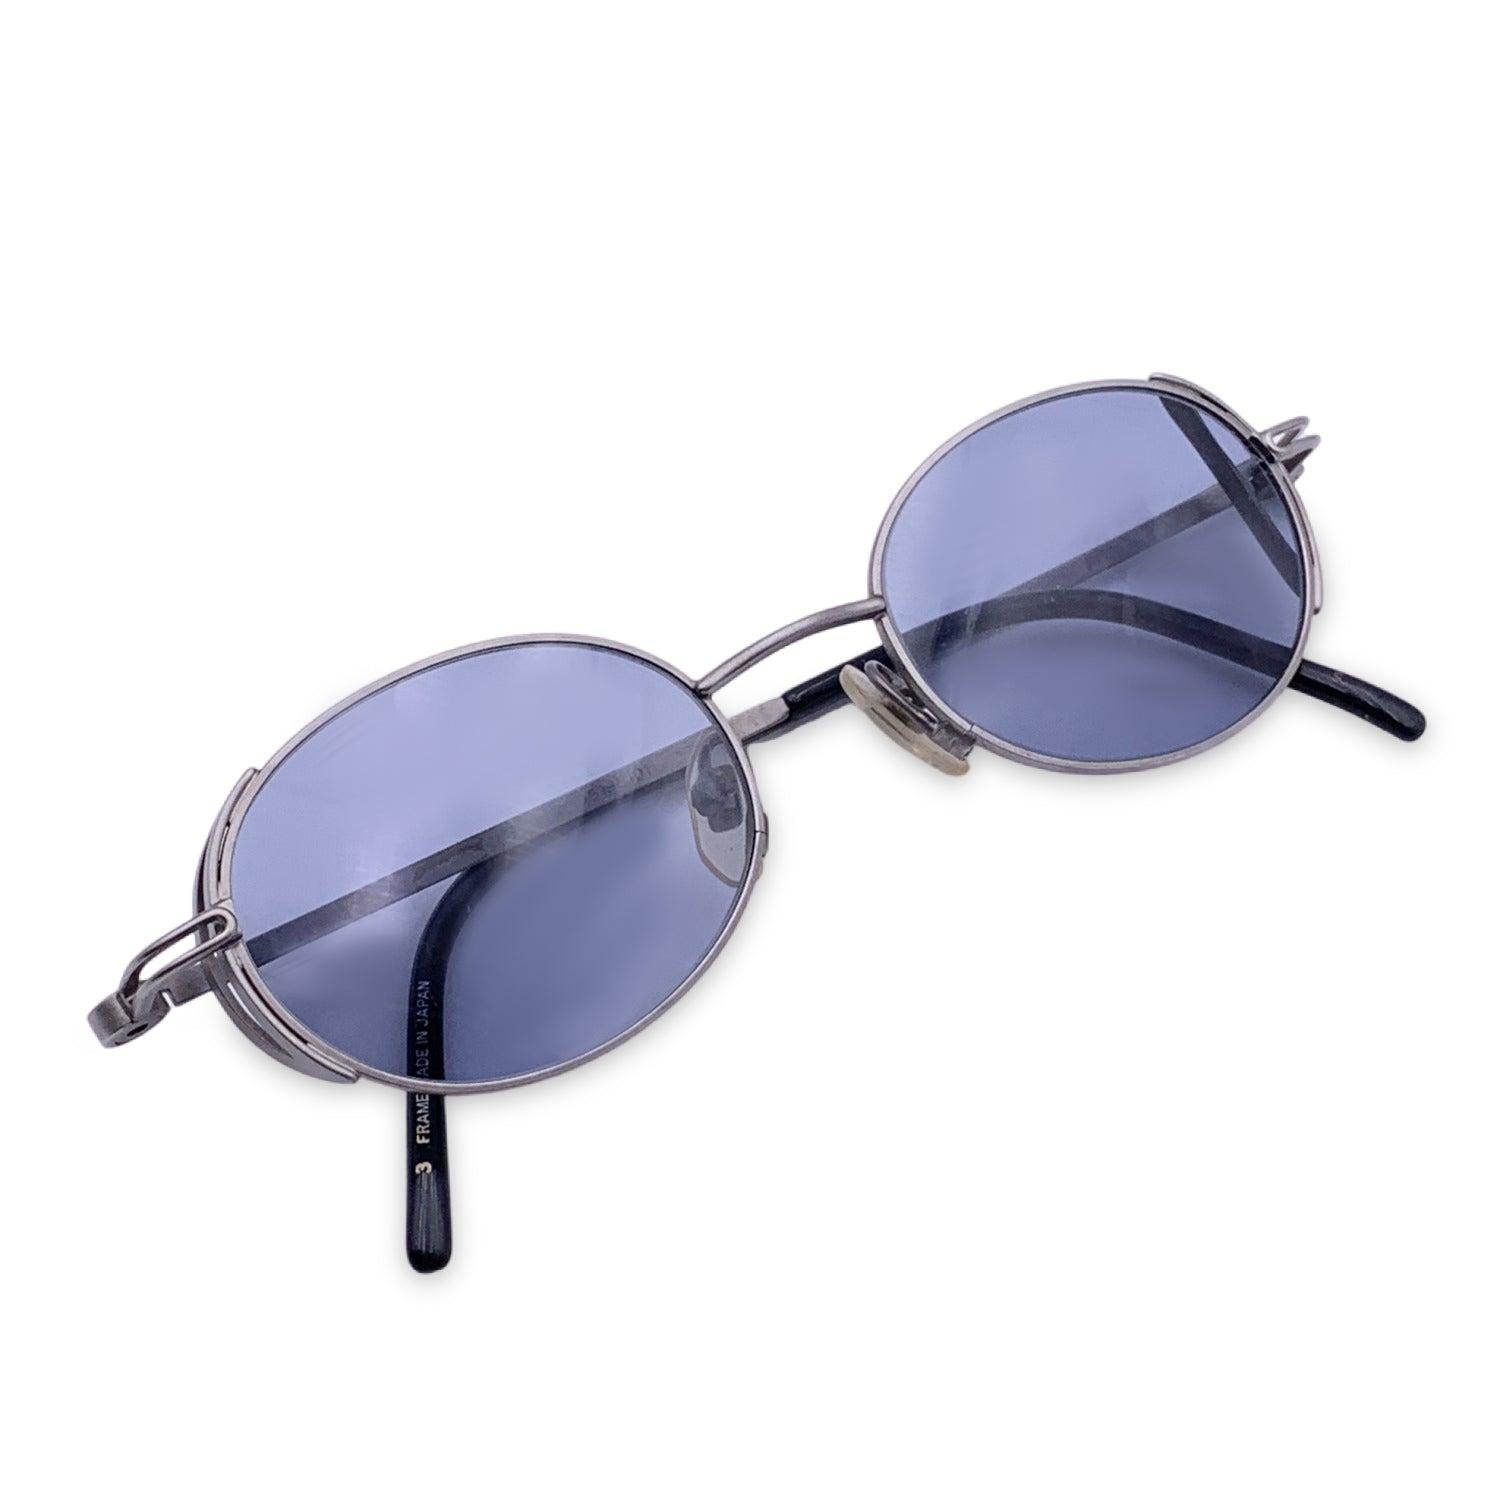 Vintage Yohji Yamamoto Grey Metal sunglasses. Model: 51-5101 Size: 48/19 138mm. Grey metal frame and temples, with black acetate on the finish. 100% Total UVA/UVB protection. Gradient Blue lenses. Details MATERIAL: Metal COLOR: Grey MODEL: 51-5101